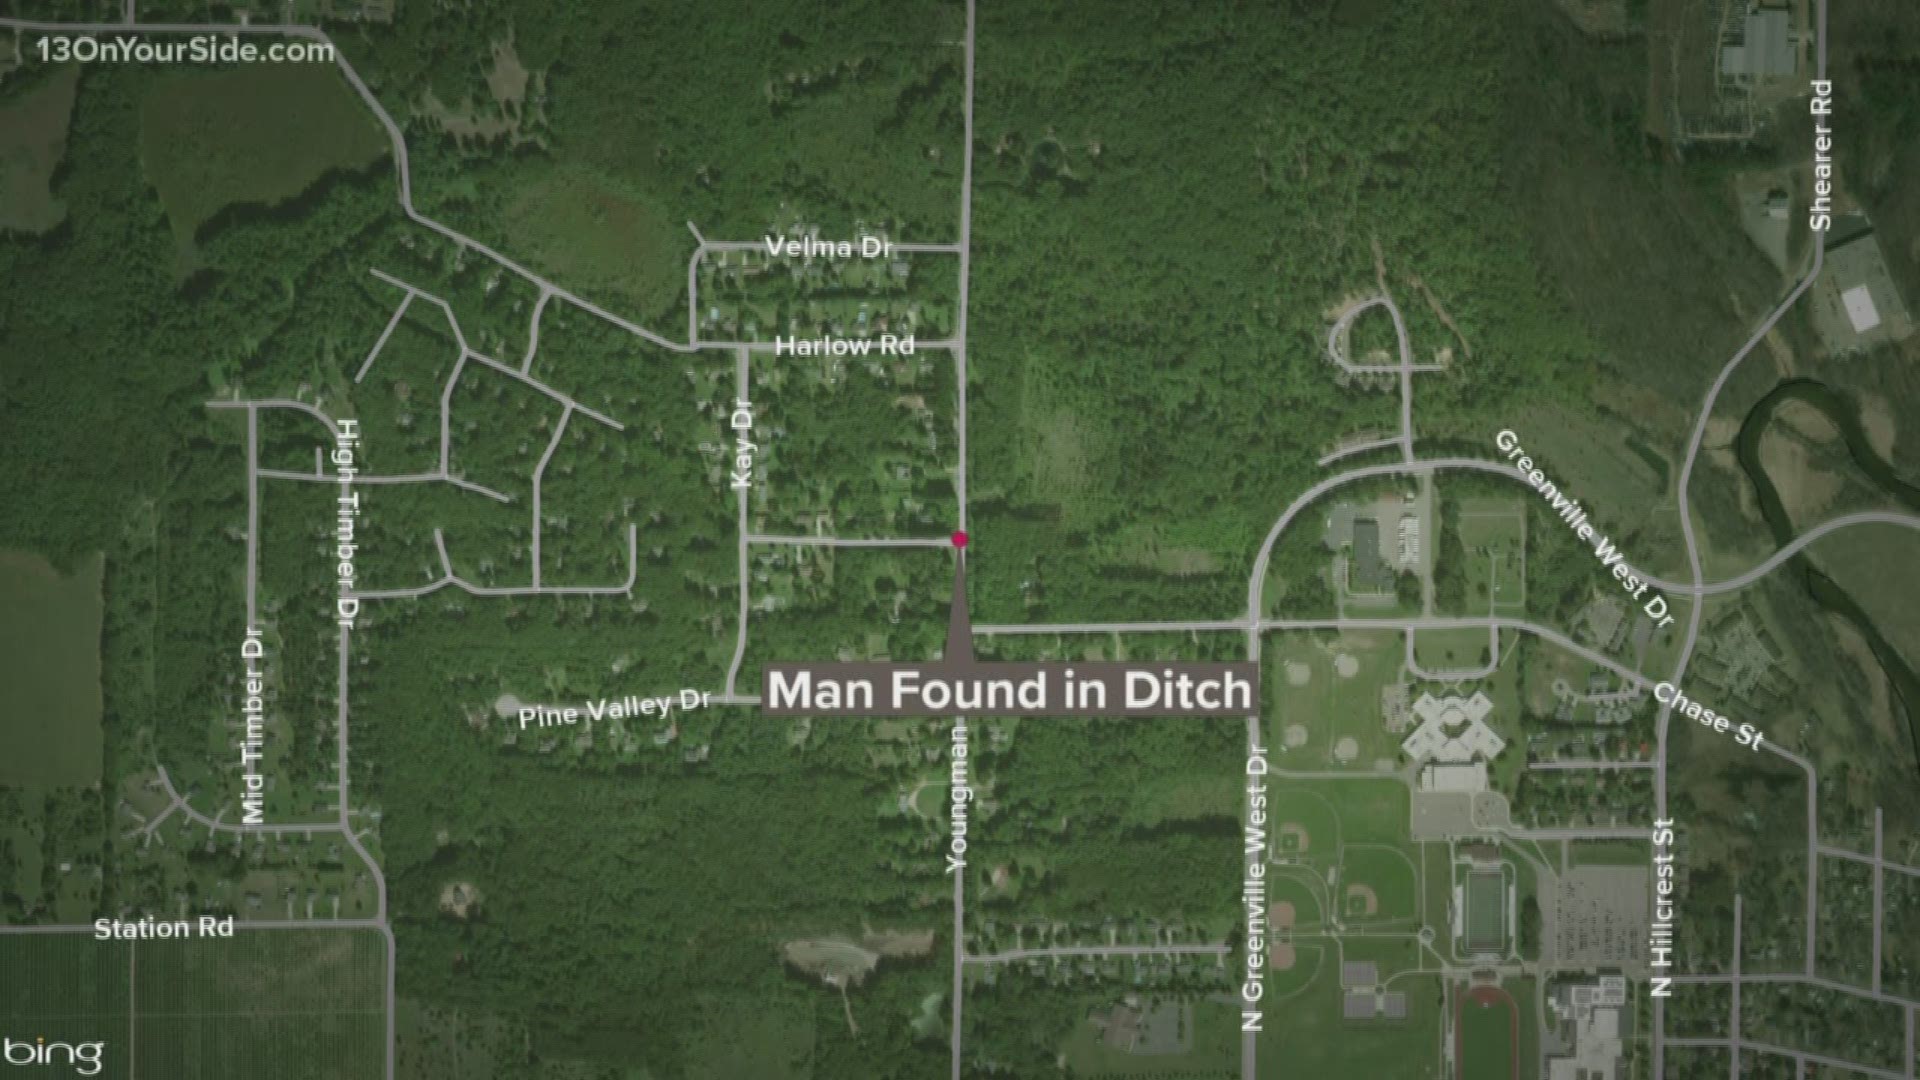 Authorities in Montcalm County are looking for the driver of a vehicle who hit a man and left him injured in a ditch. Based on the 27-year-old's injuries, investigators believe he may have been hit by a SUV or pickup truck.